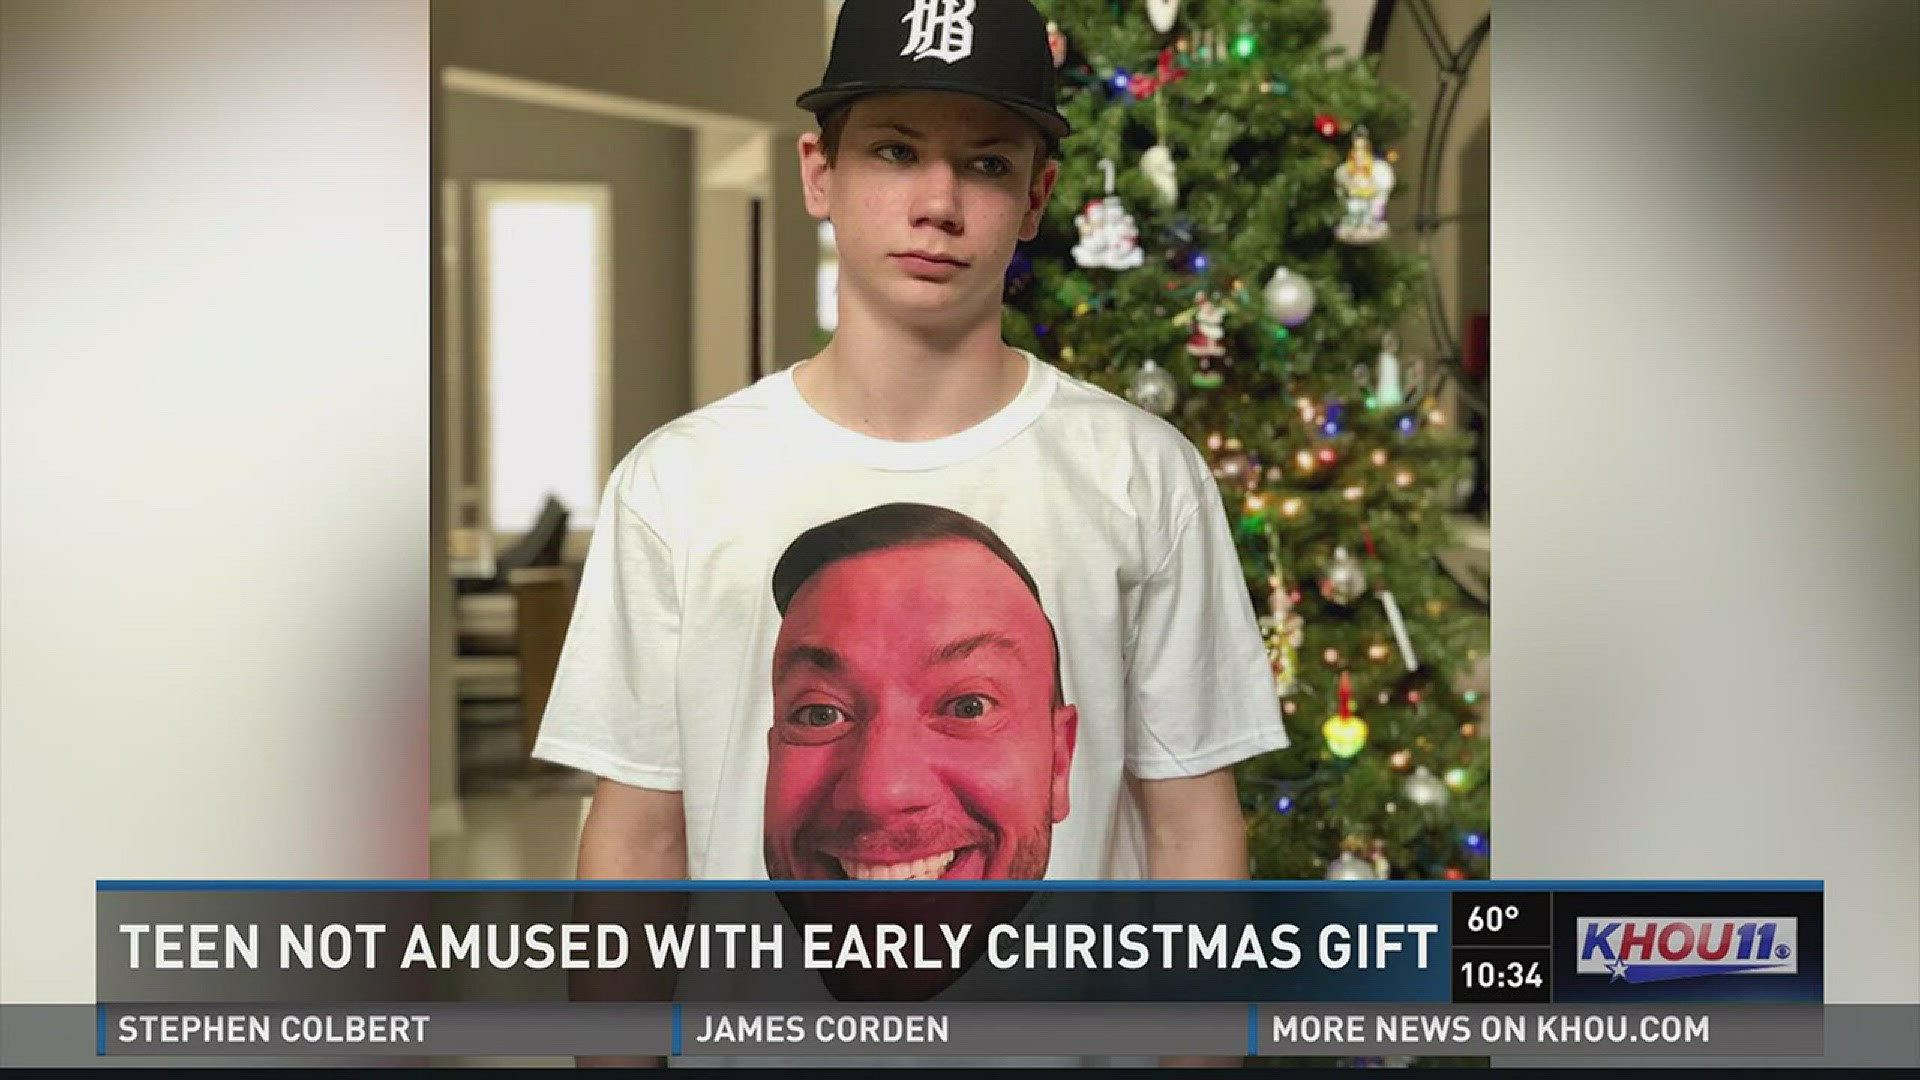 A Pearland teen got an early Christmas present, but he was not too thrilled about it.